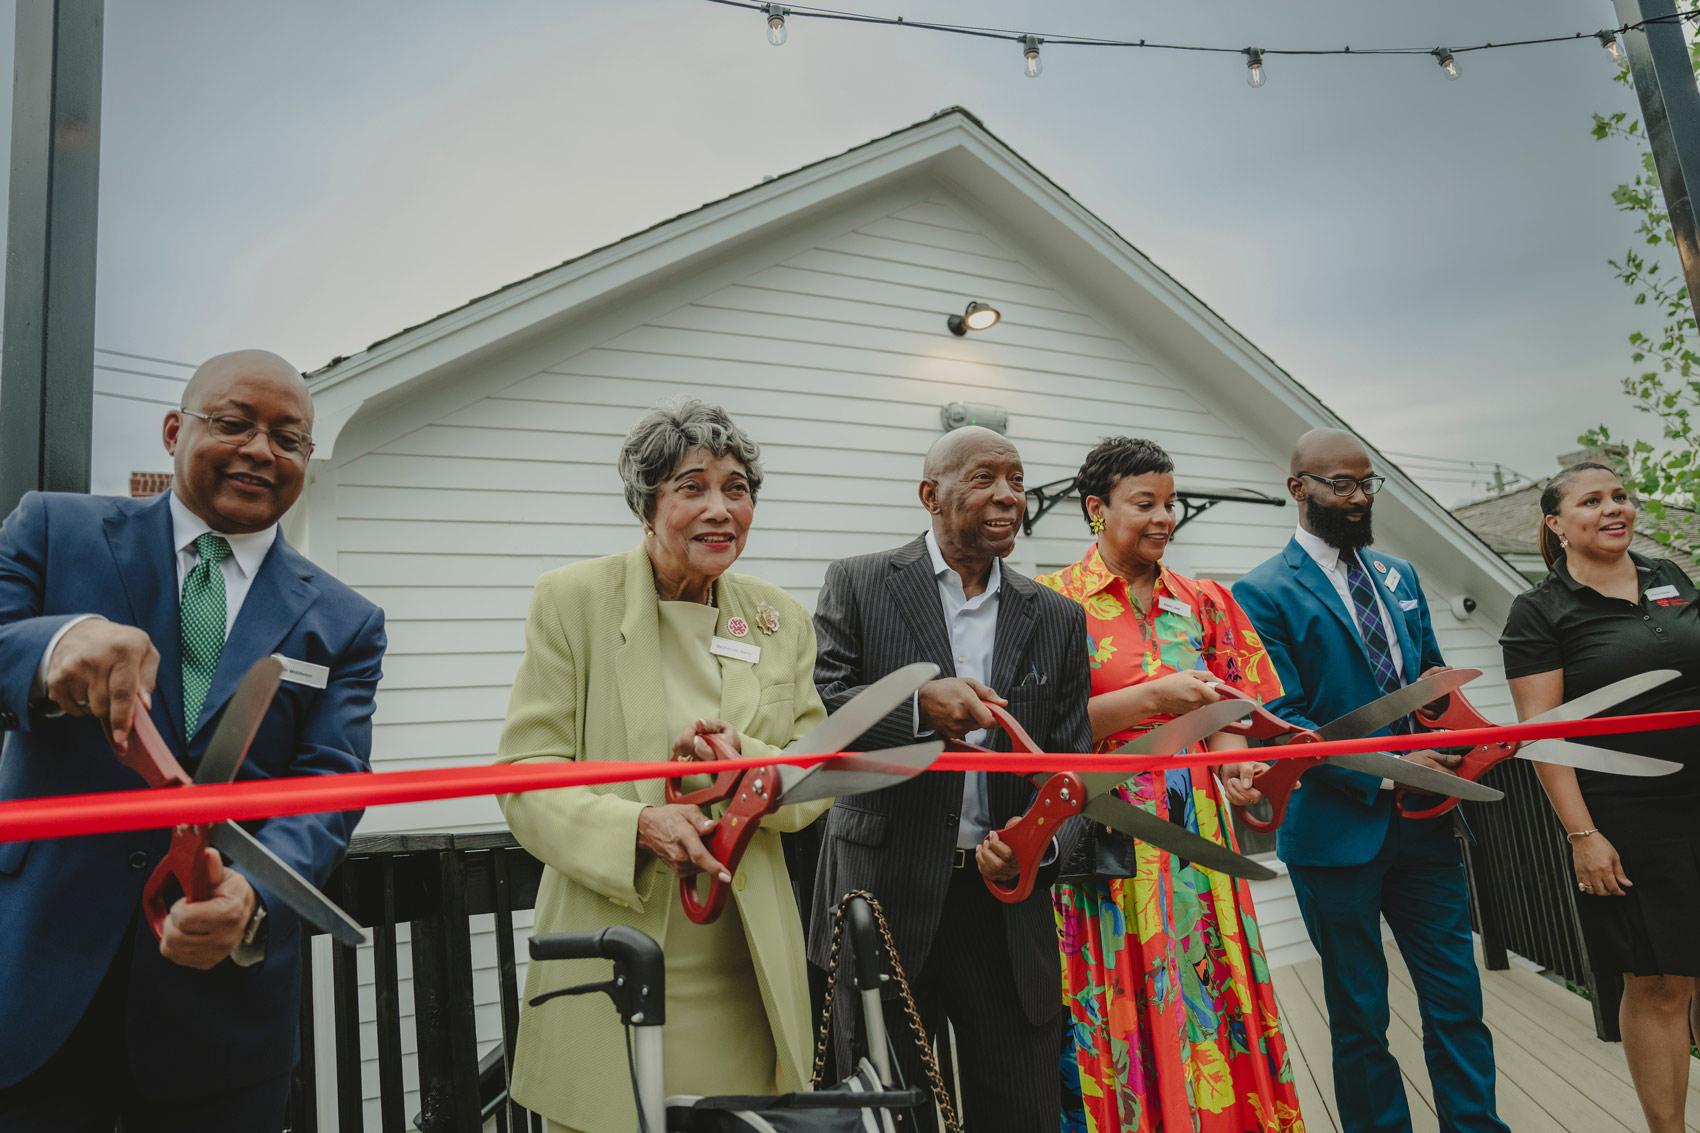 After 6 years, Houston’s Freedmen’s Town opens its visitor center